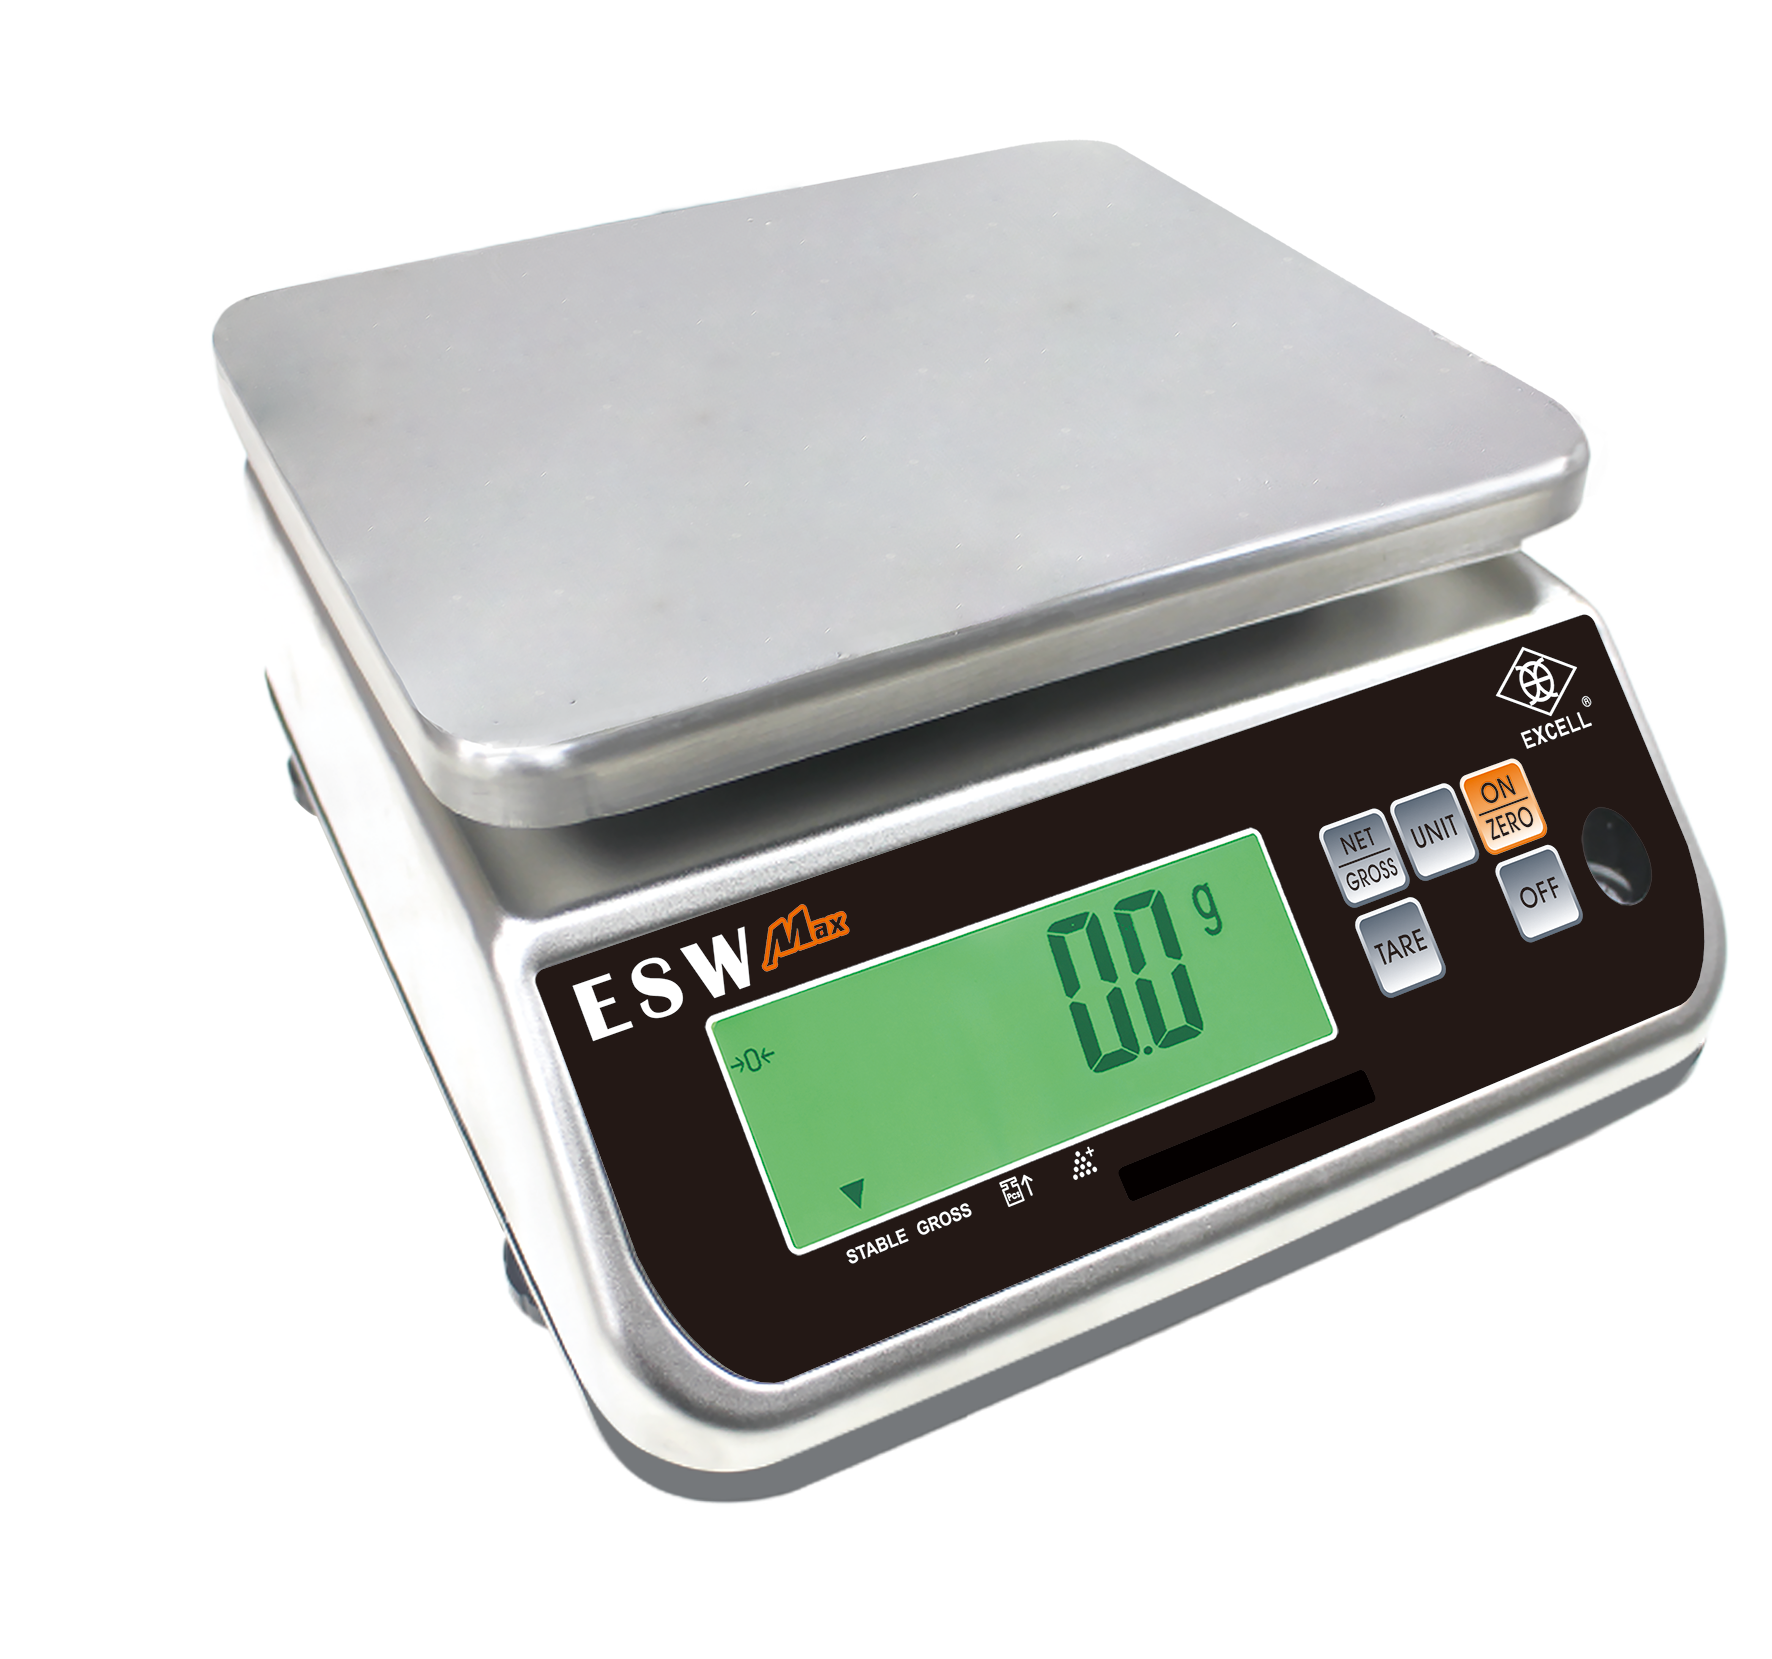 ESW Max <br>IP68 Energy-efficient Battery-powered Waterproof Weighing Scale